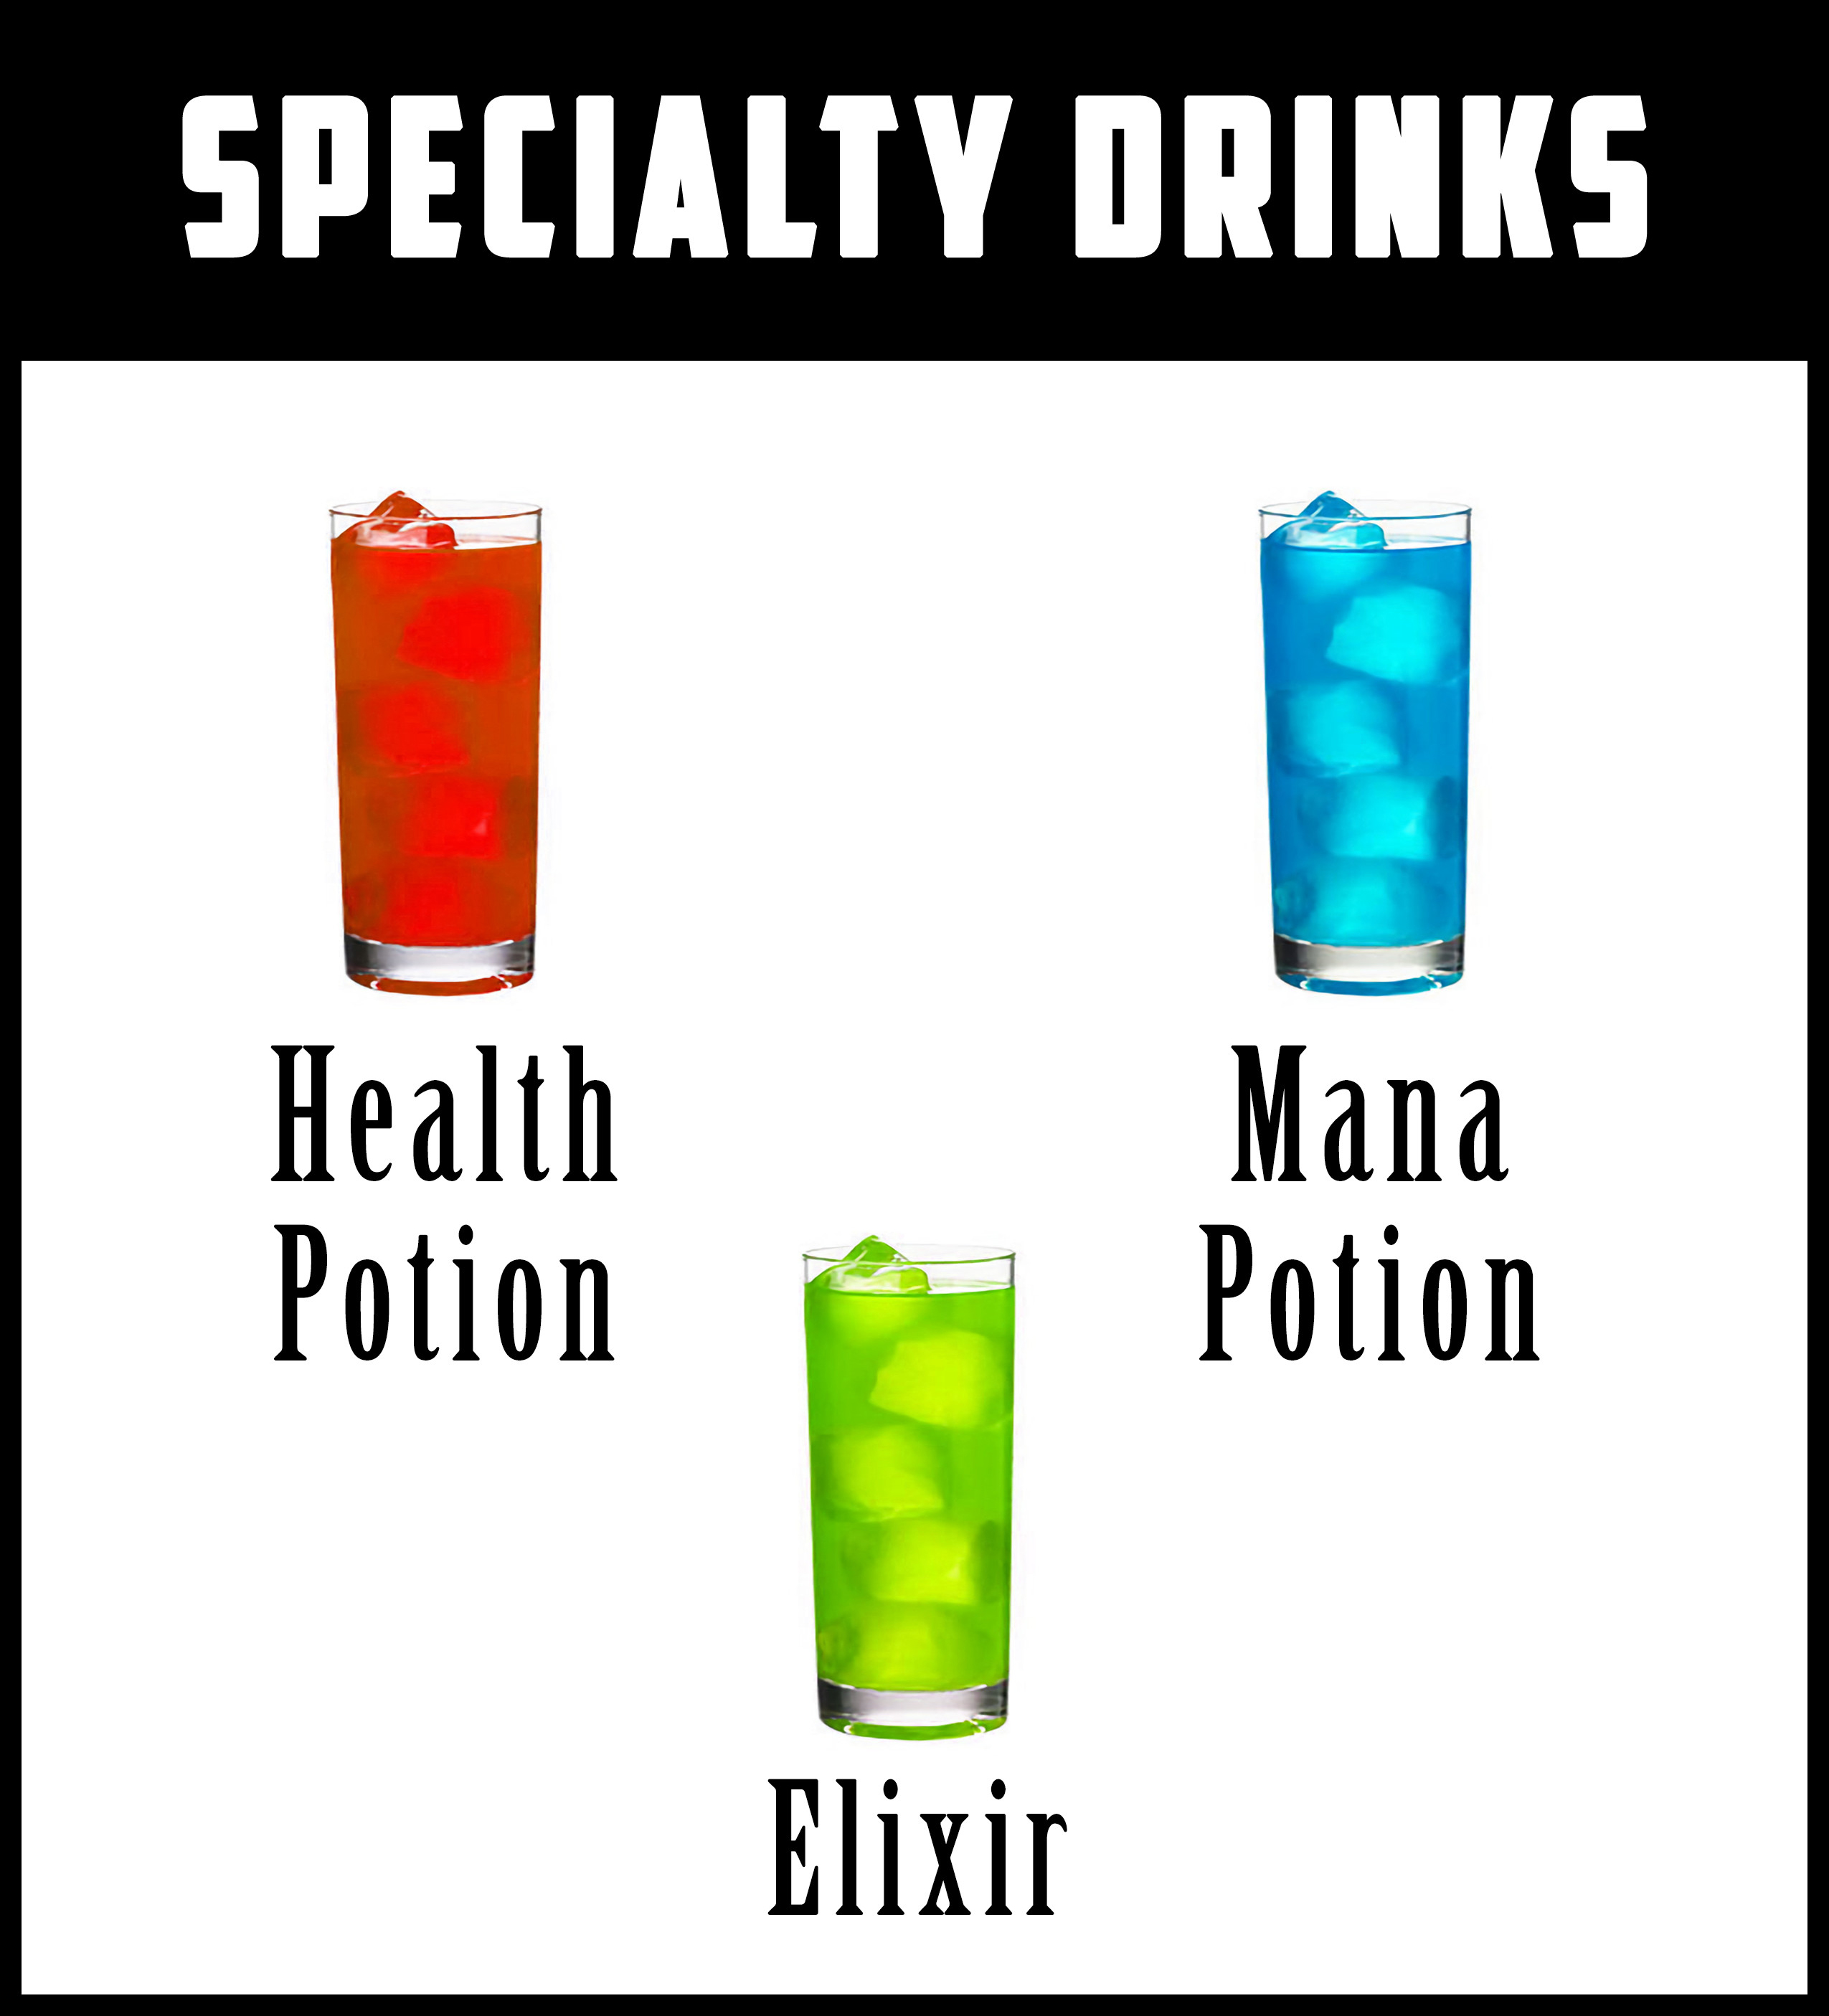 Specialty drinks